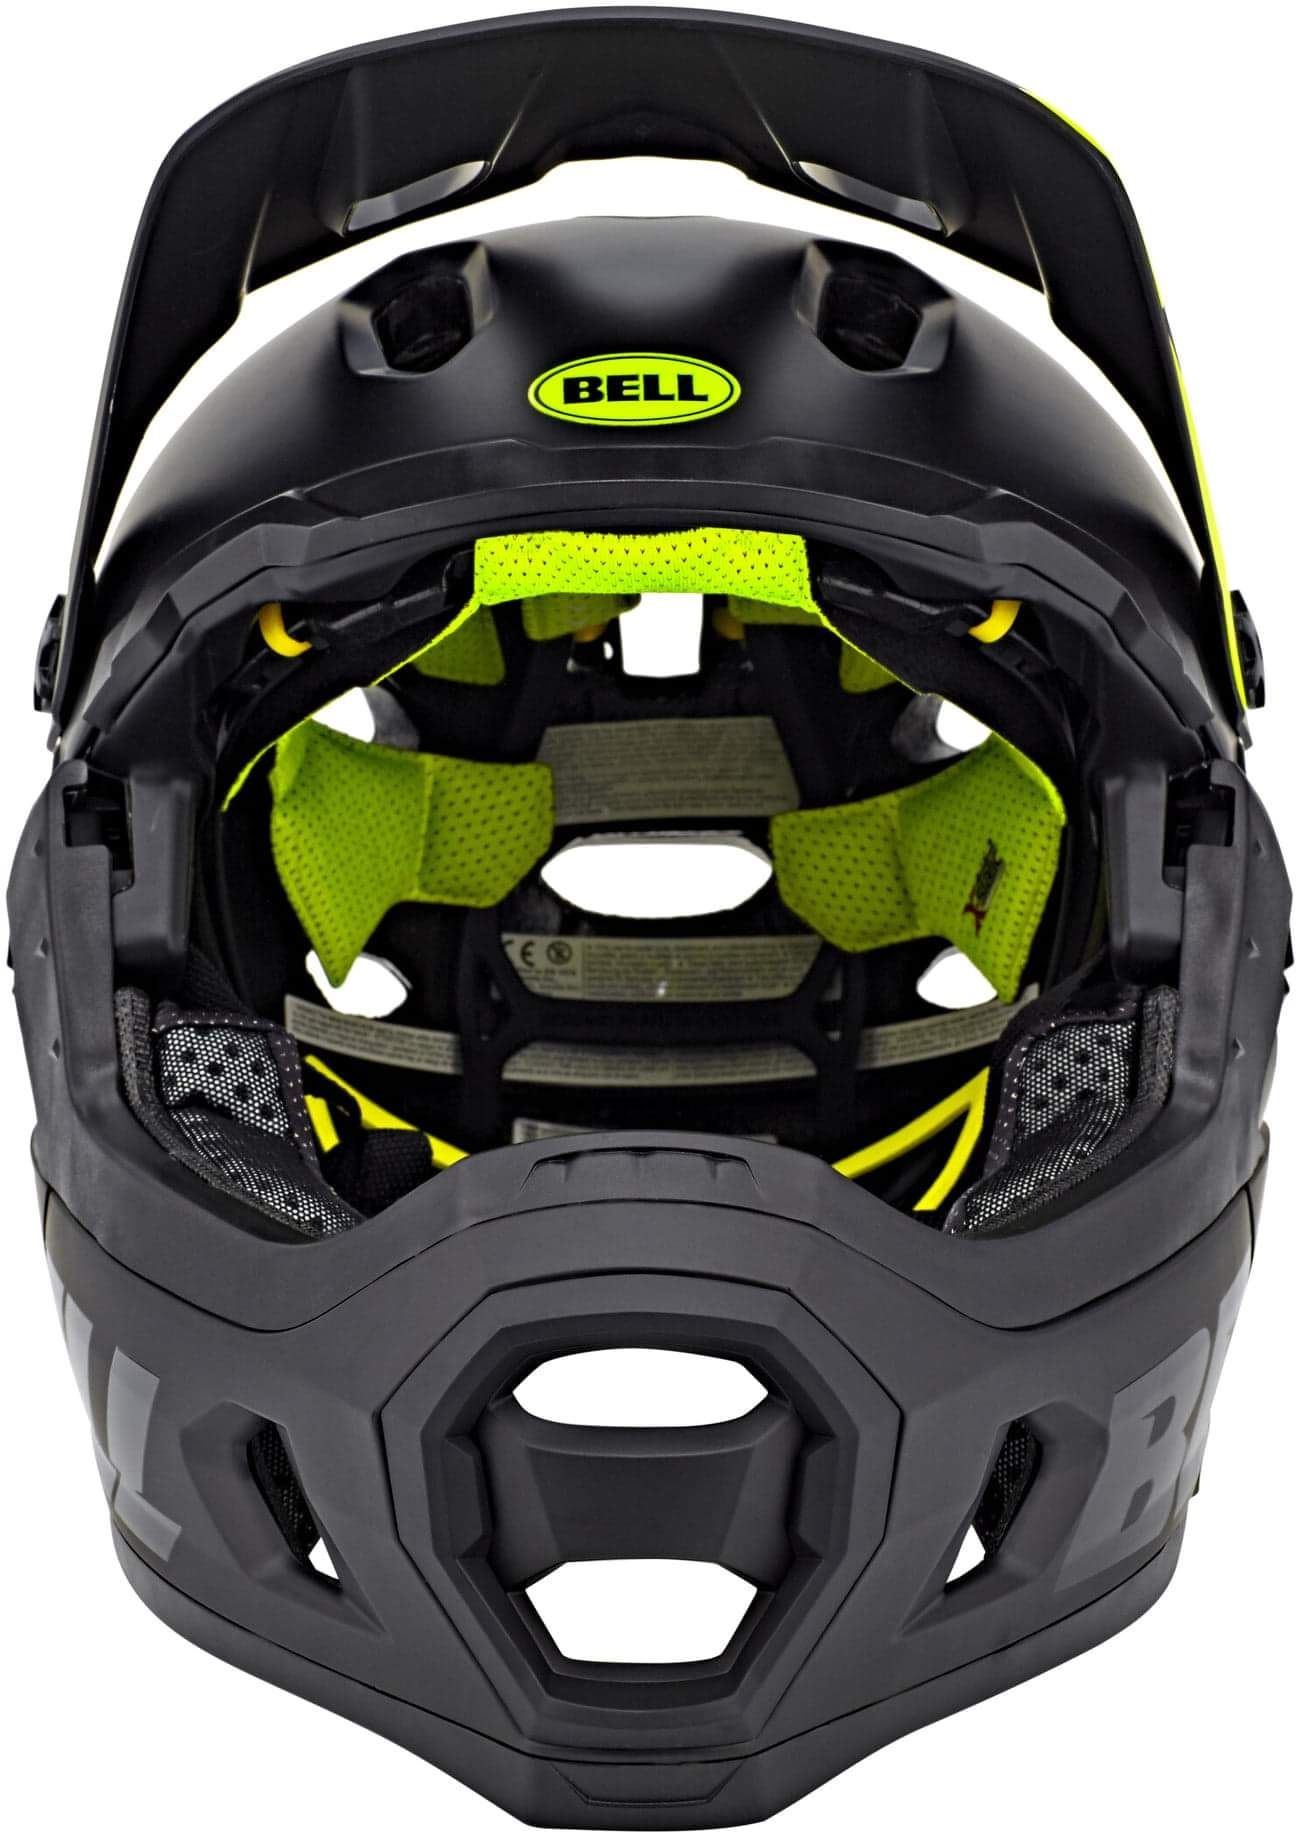 Casca protectie Bell Super DH